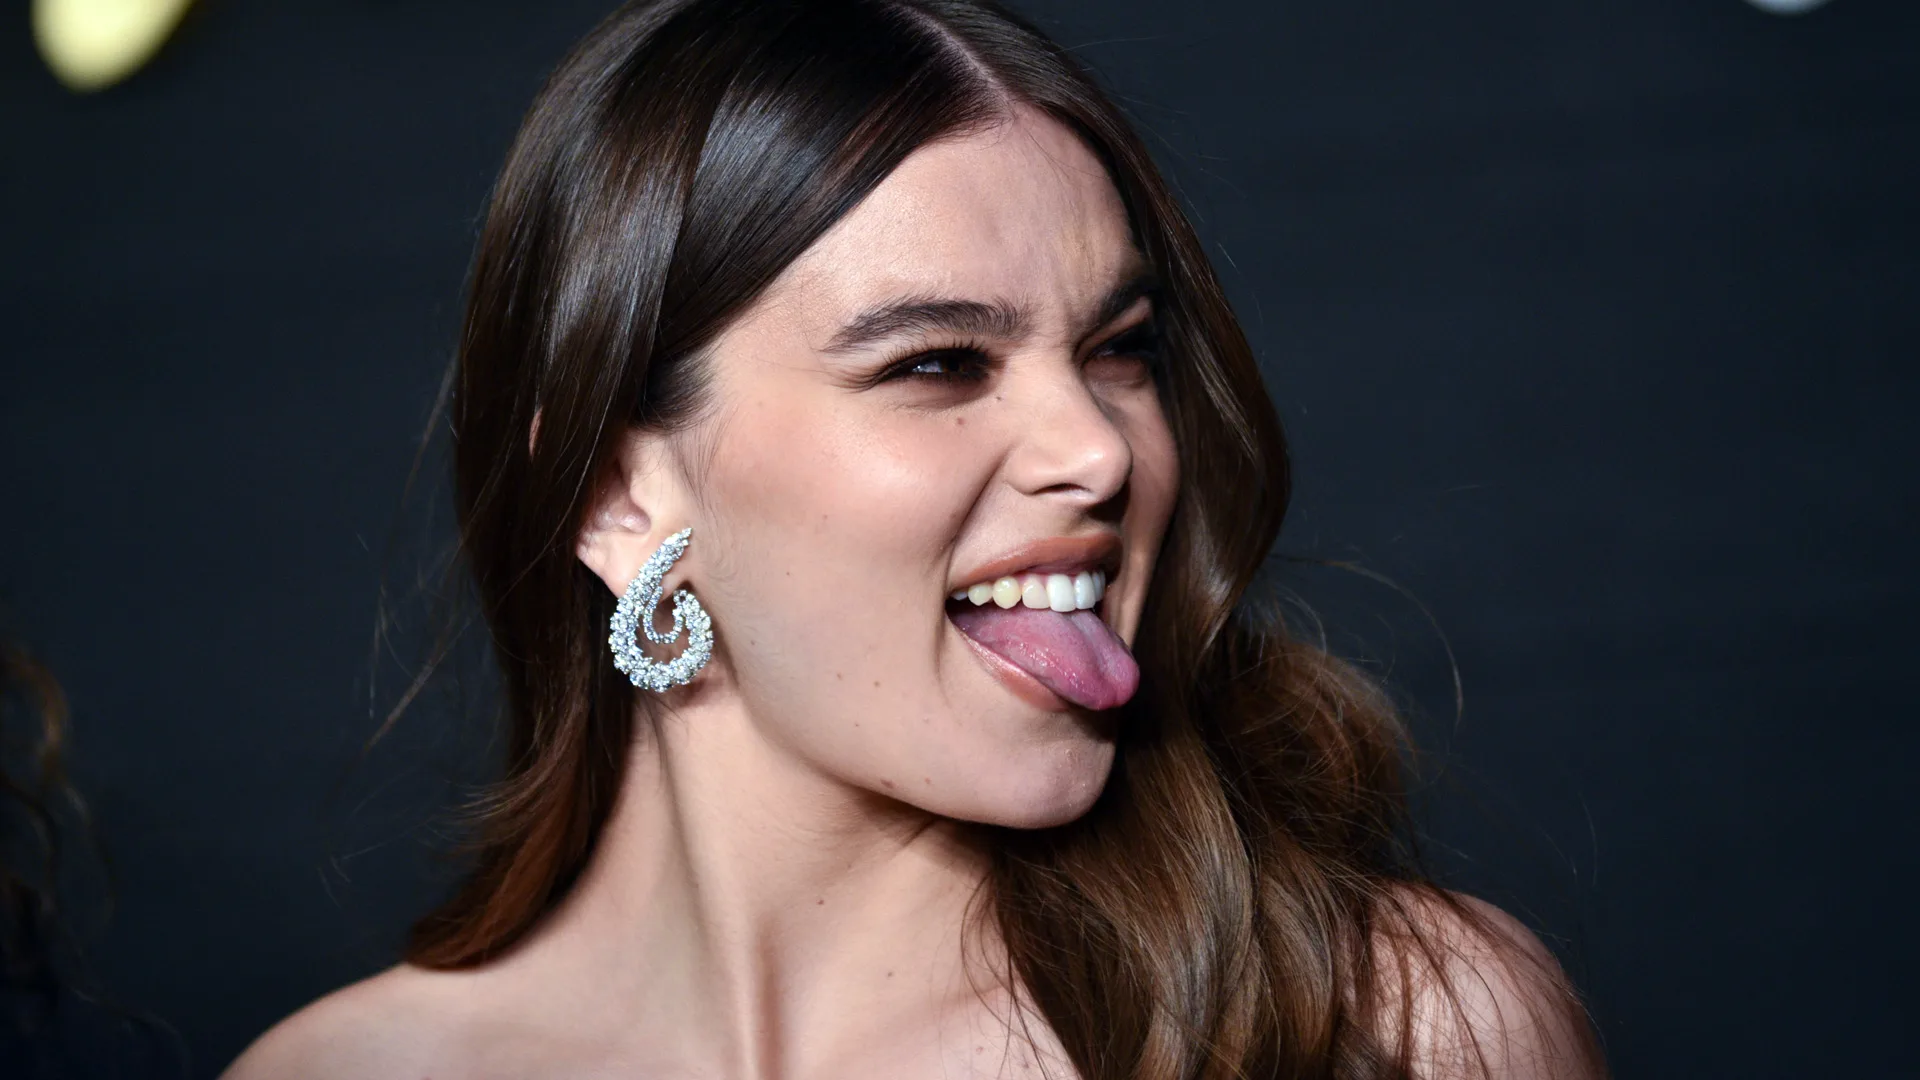 A photograph of the singer Hailee Steinfeld sticking her tongue out to someone off camera in a cheeky smile. She is wearing silver curly earrings with her brown hair down over her shoulder against a black background.